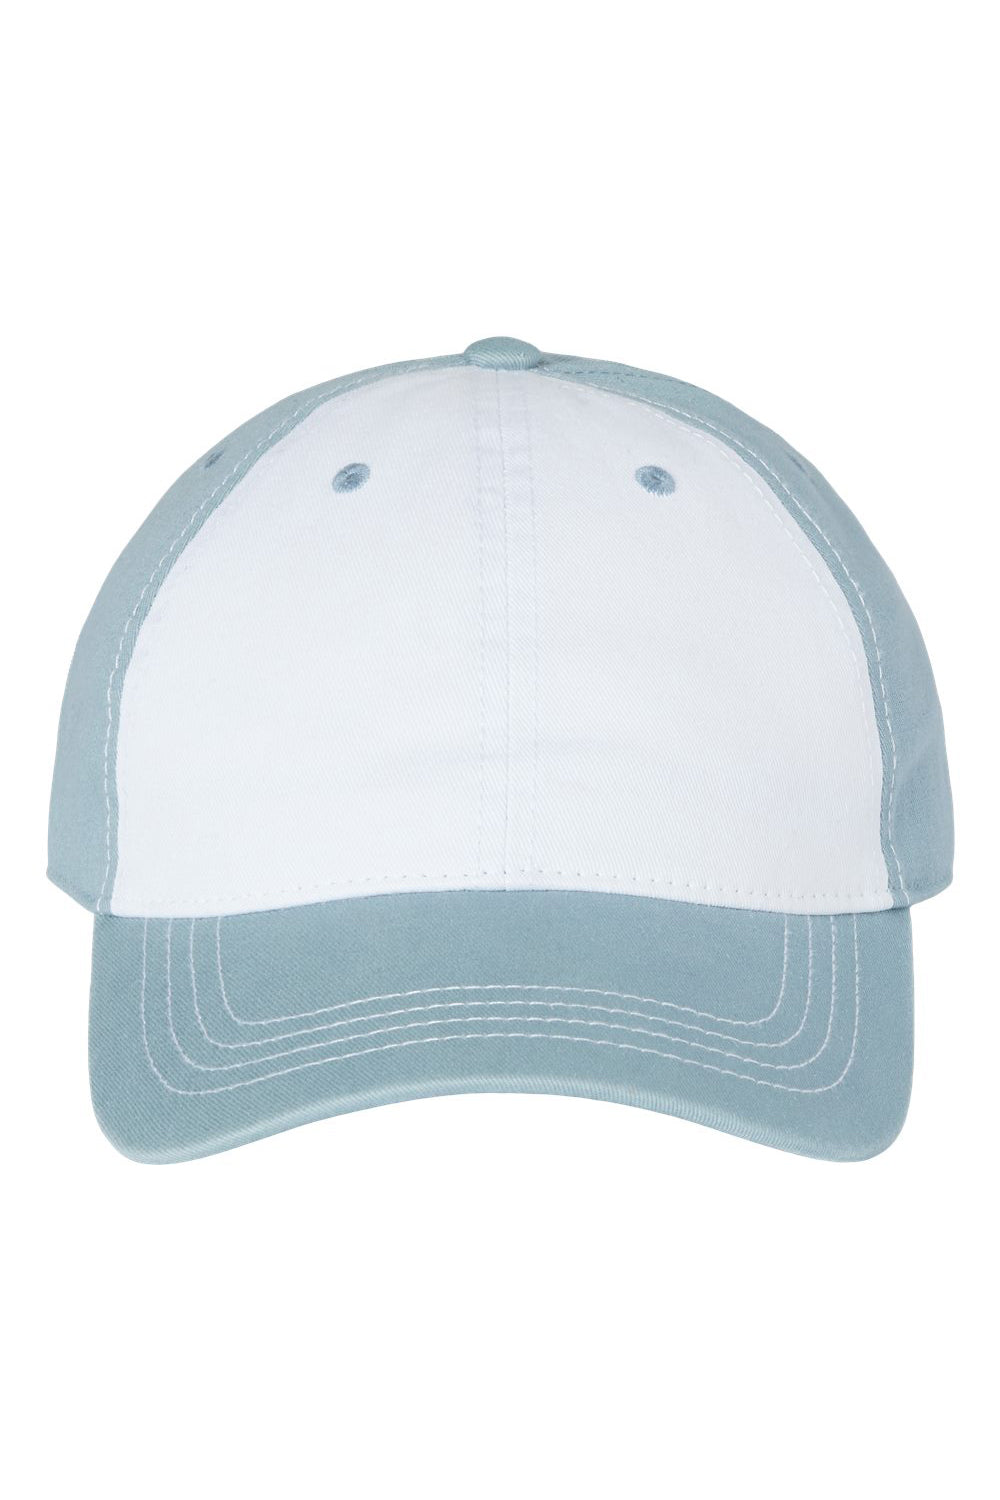 Cap America i1002 Mens Relaxed Adjustable Dad Hat White/Smoke Blue Flat Front